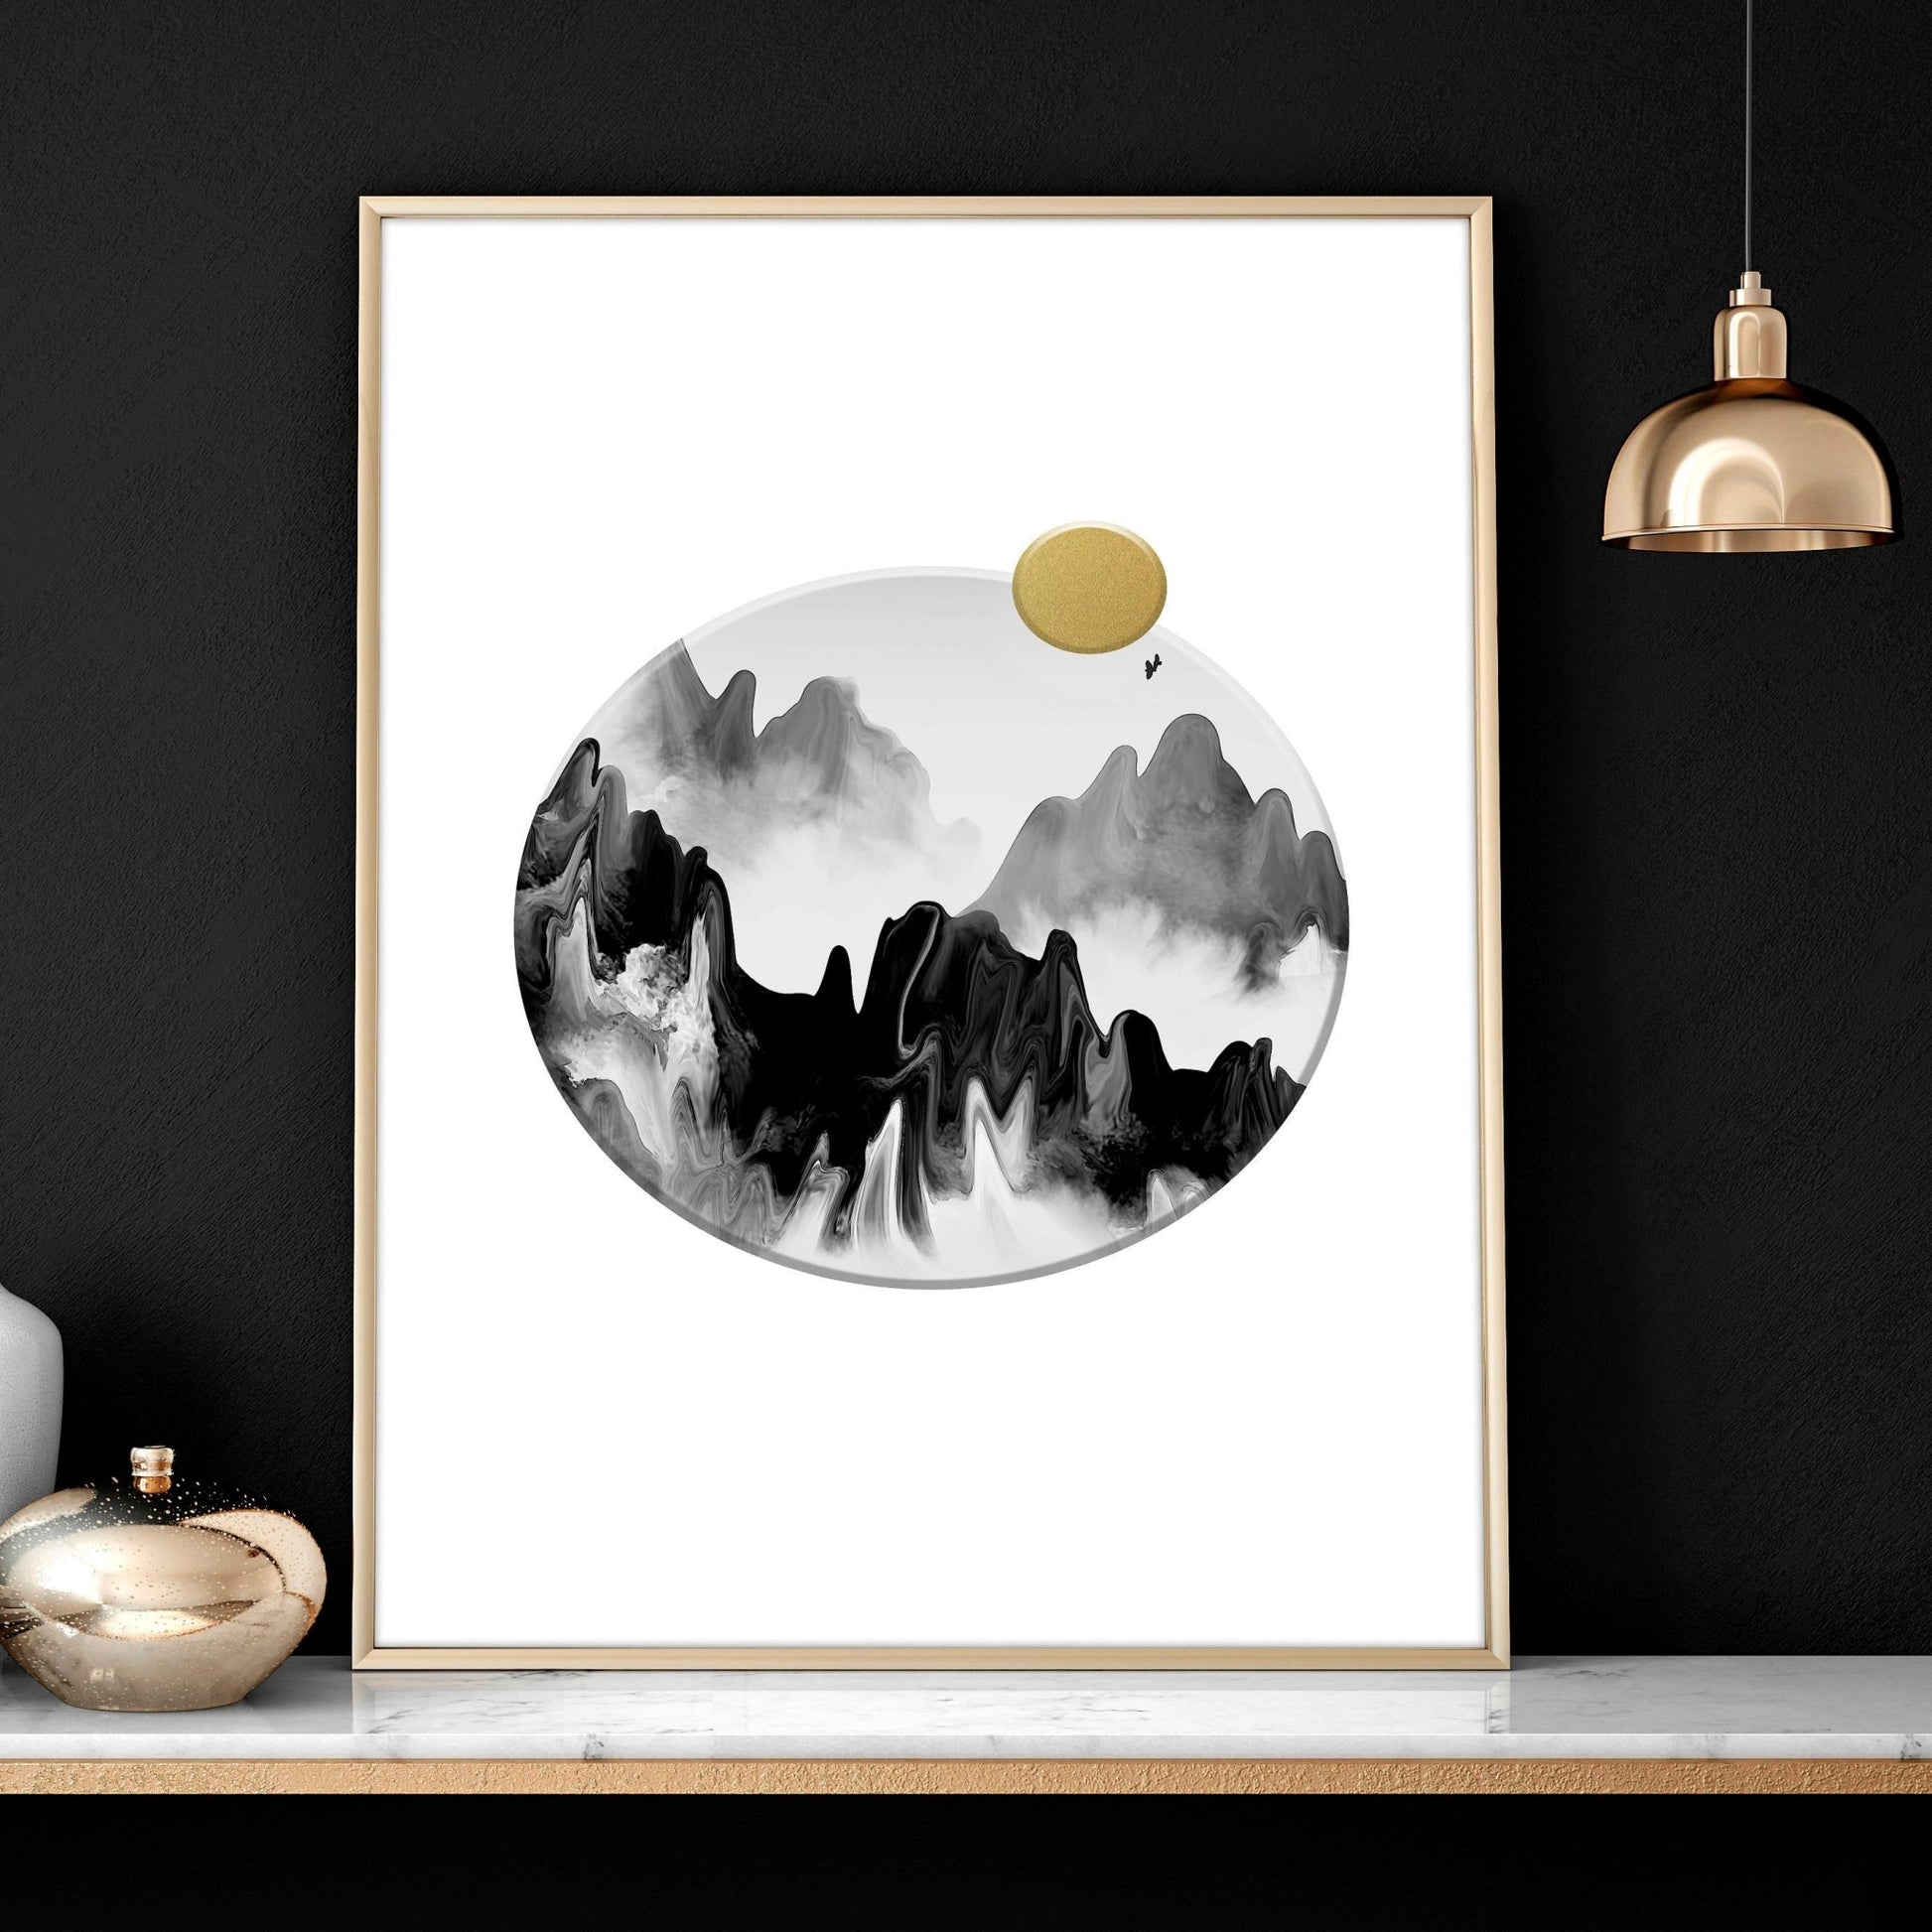 Asian inspired living room | set of 3 wall art prints - About Wall Art